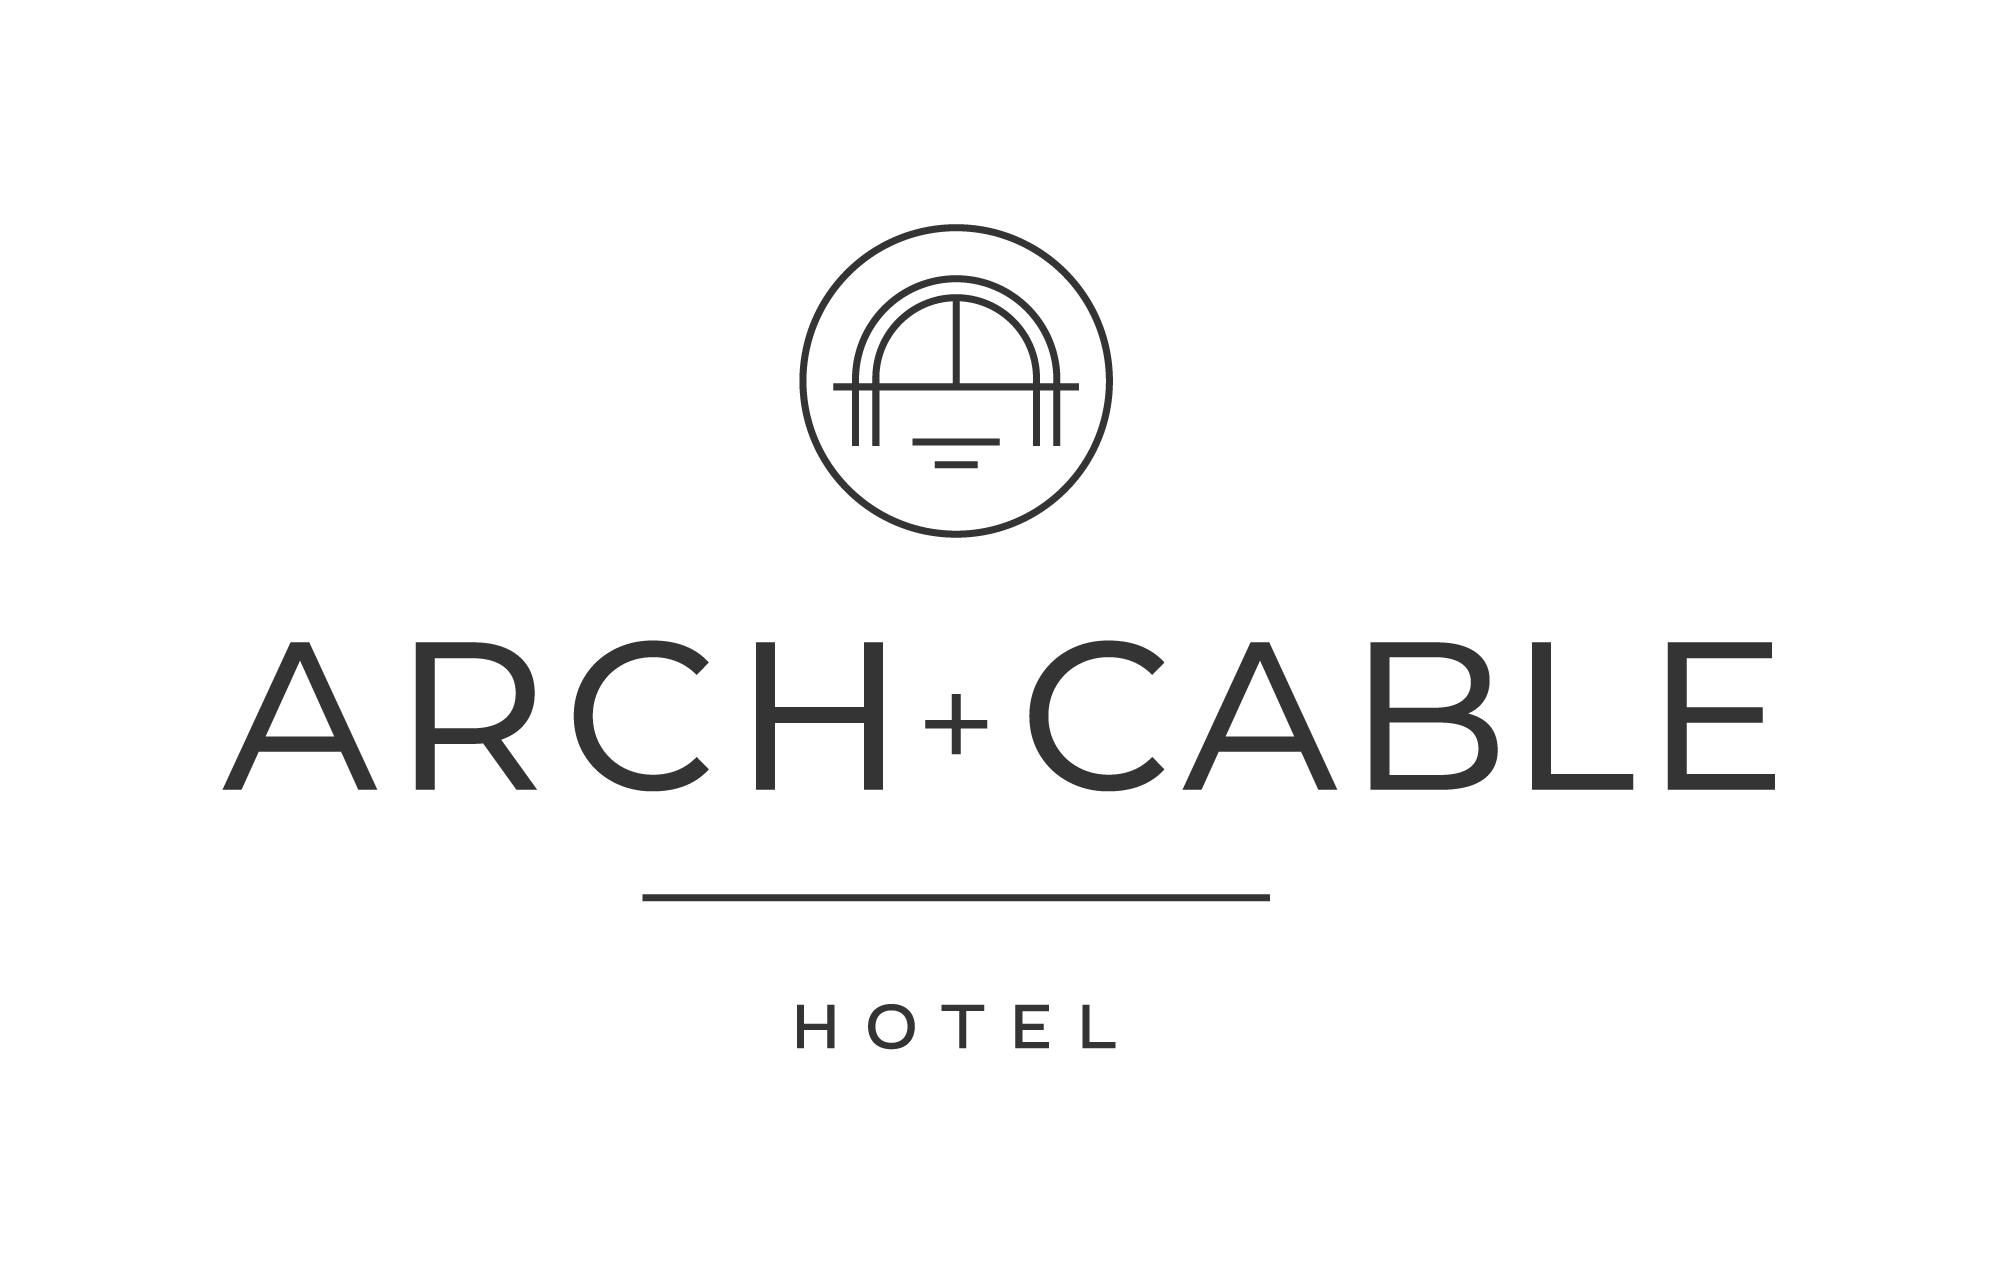 Arch + Cable